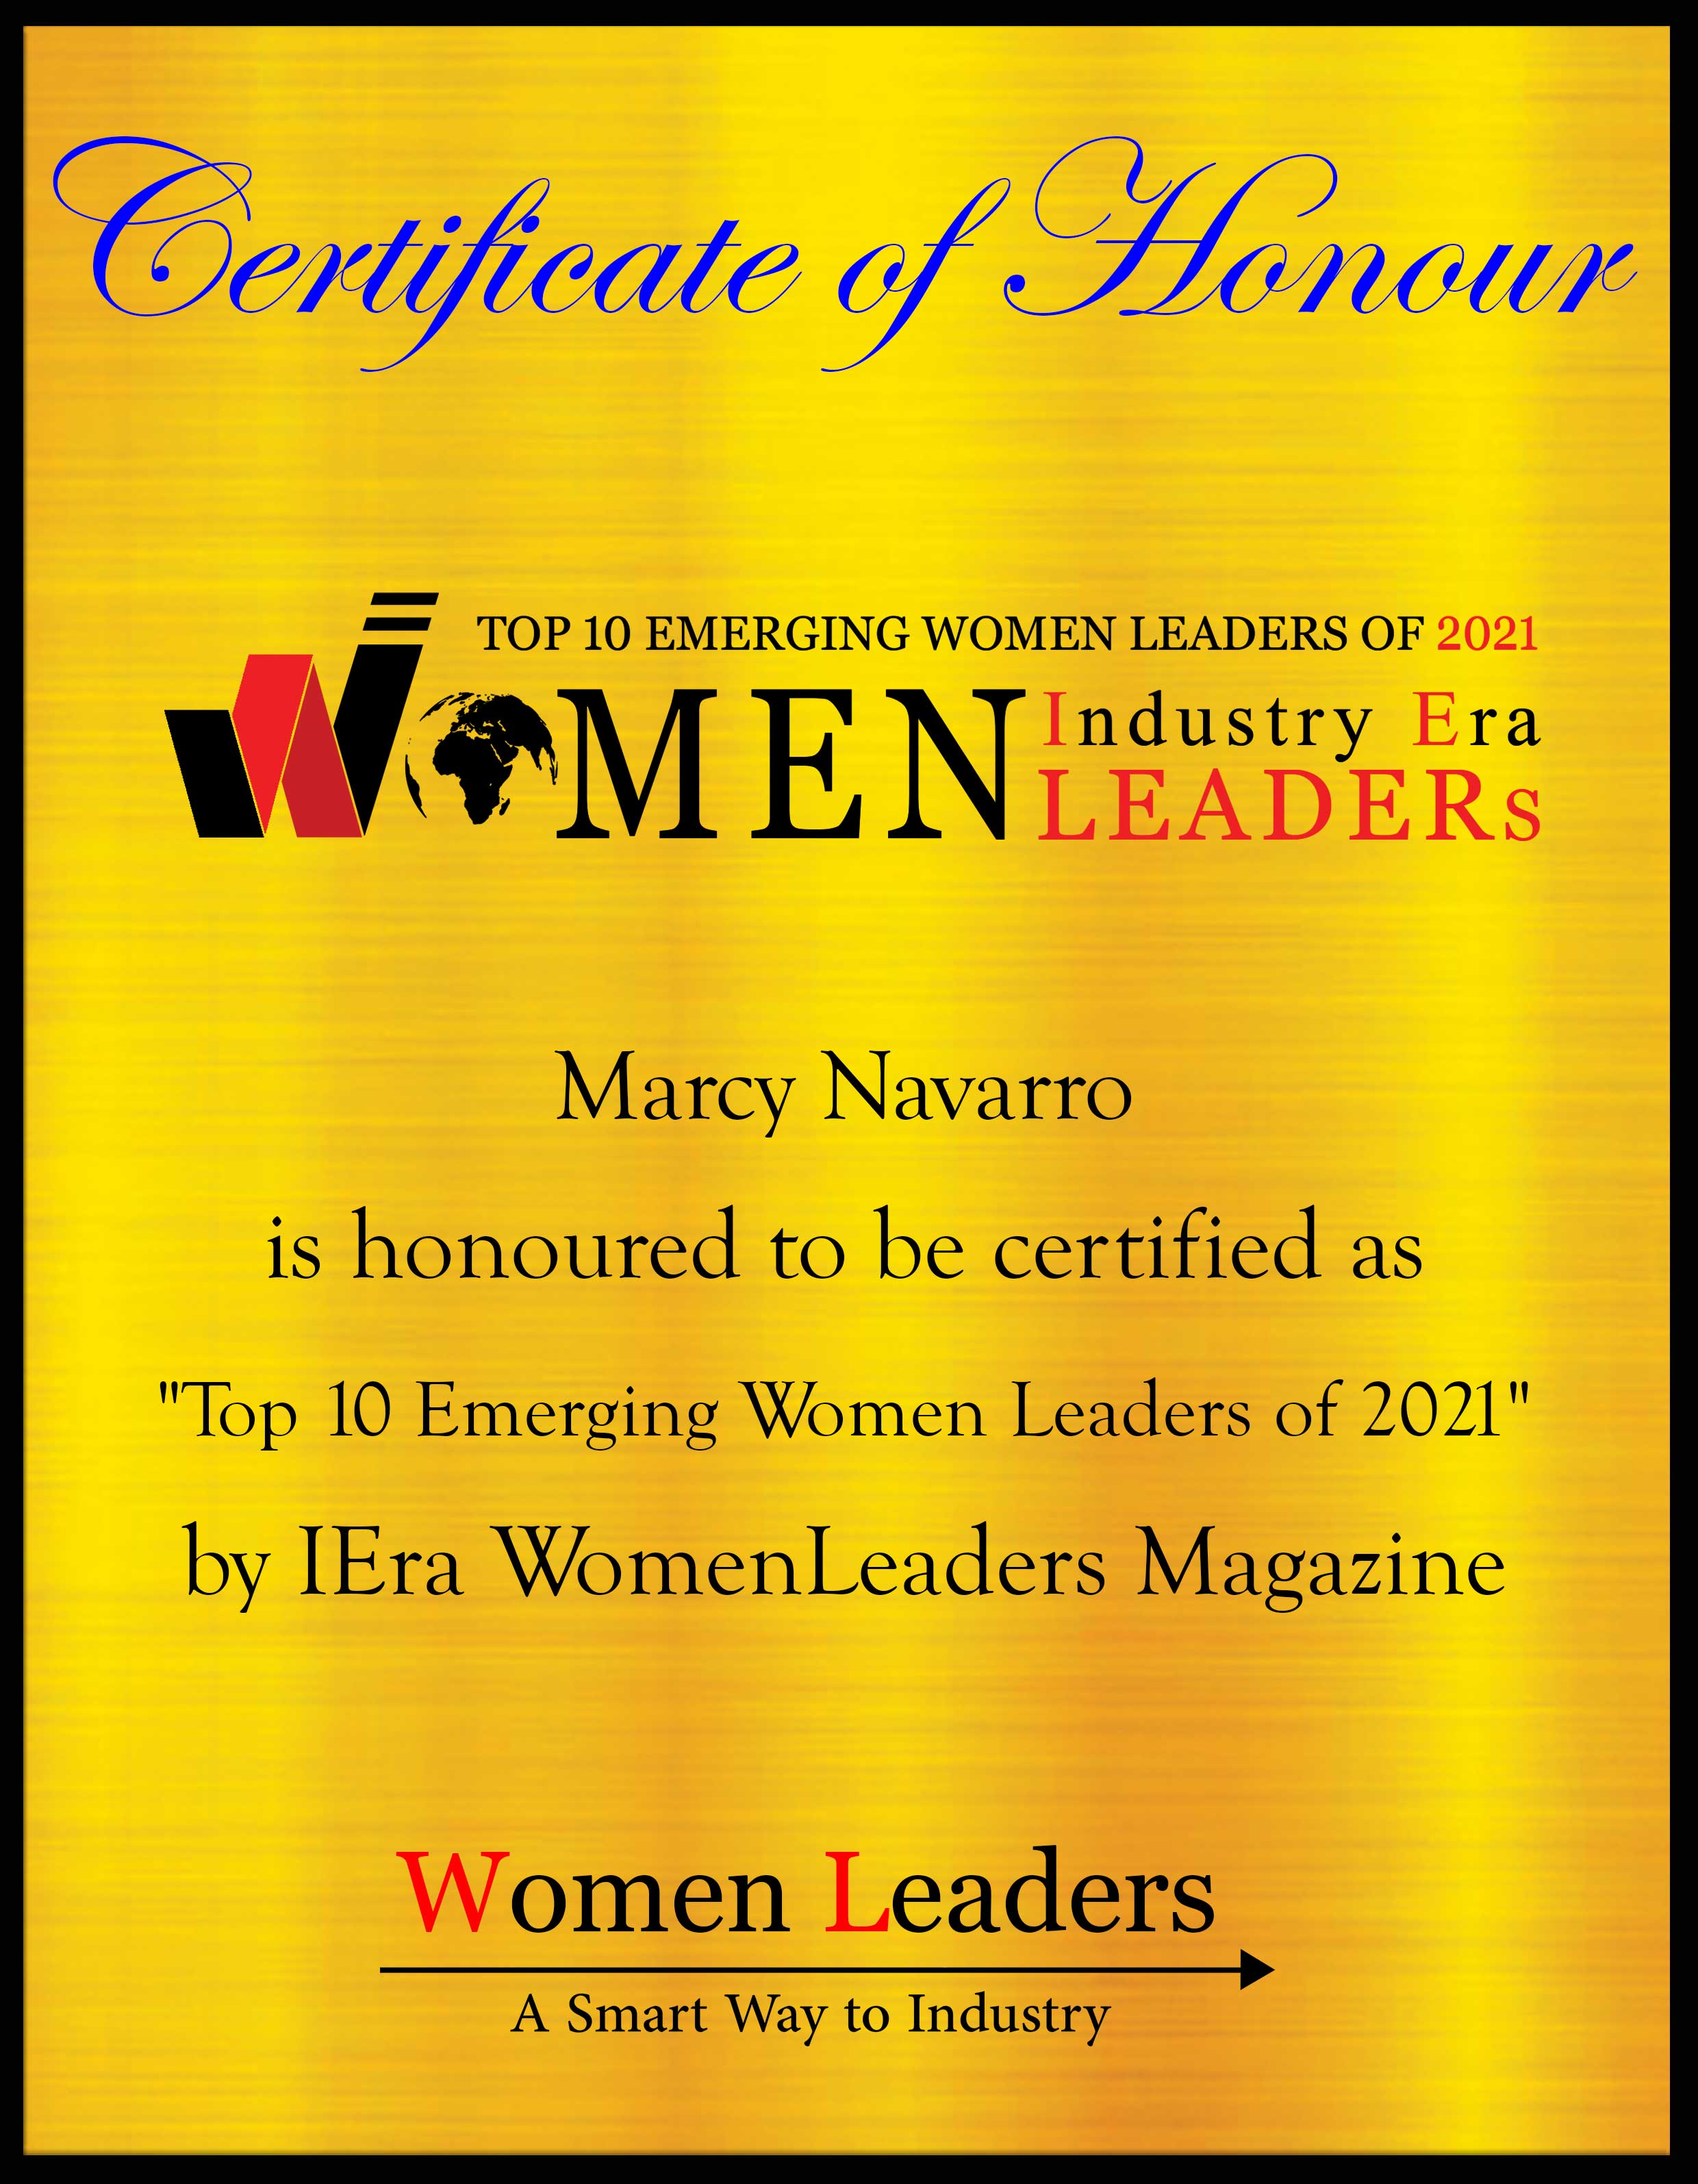 Marcy Navarro, Founder & Owner of MRX LOGISTICS, Most Emerging Women Leaders of 2021